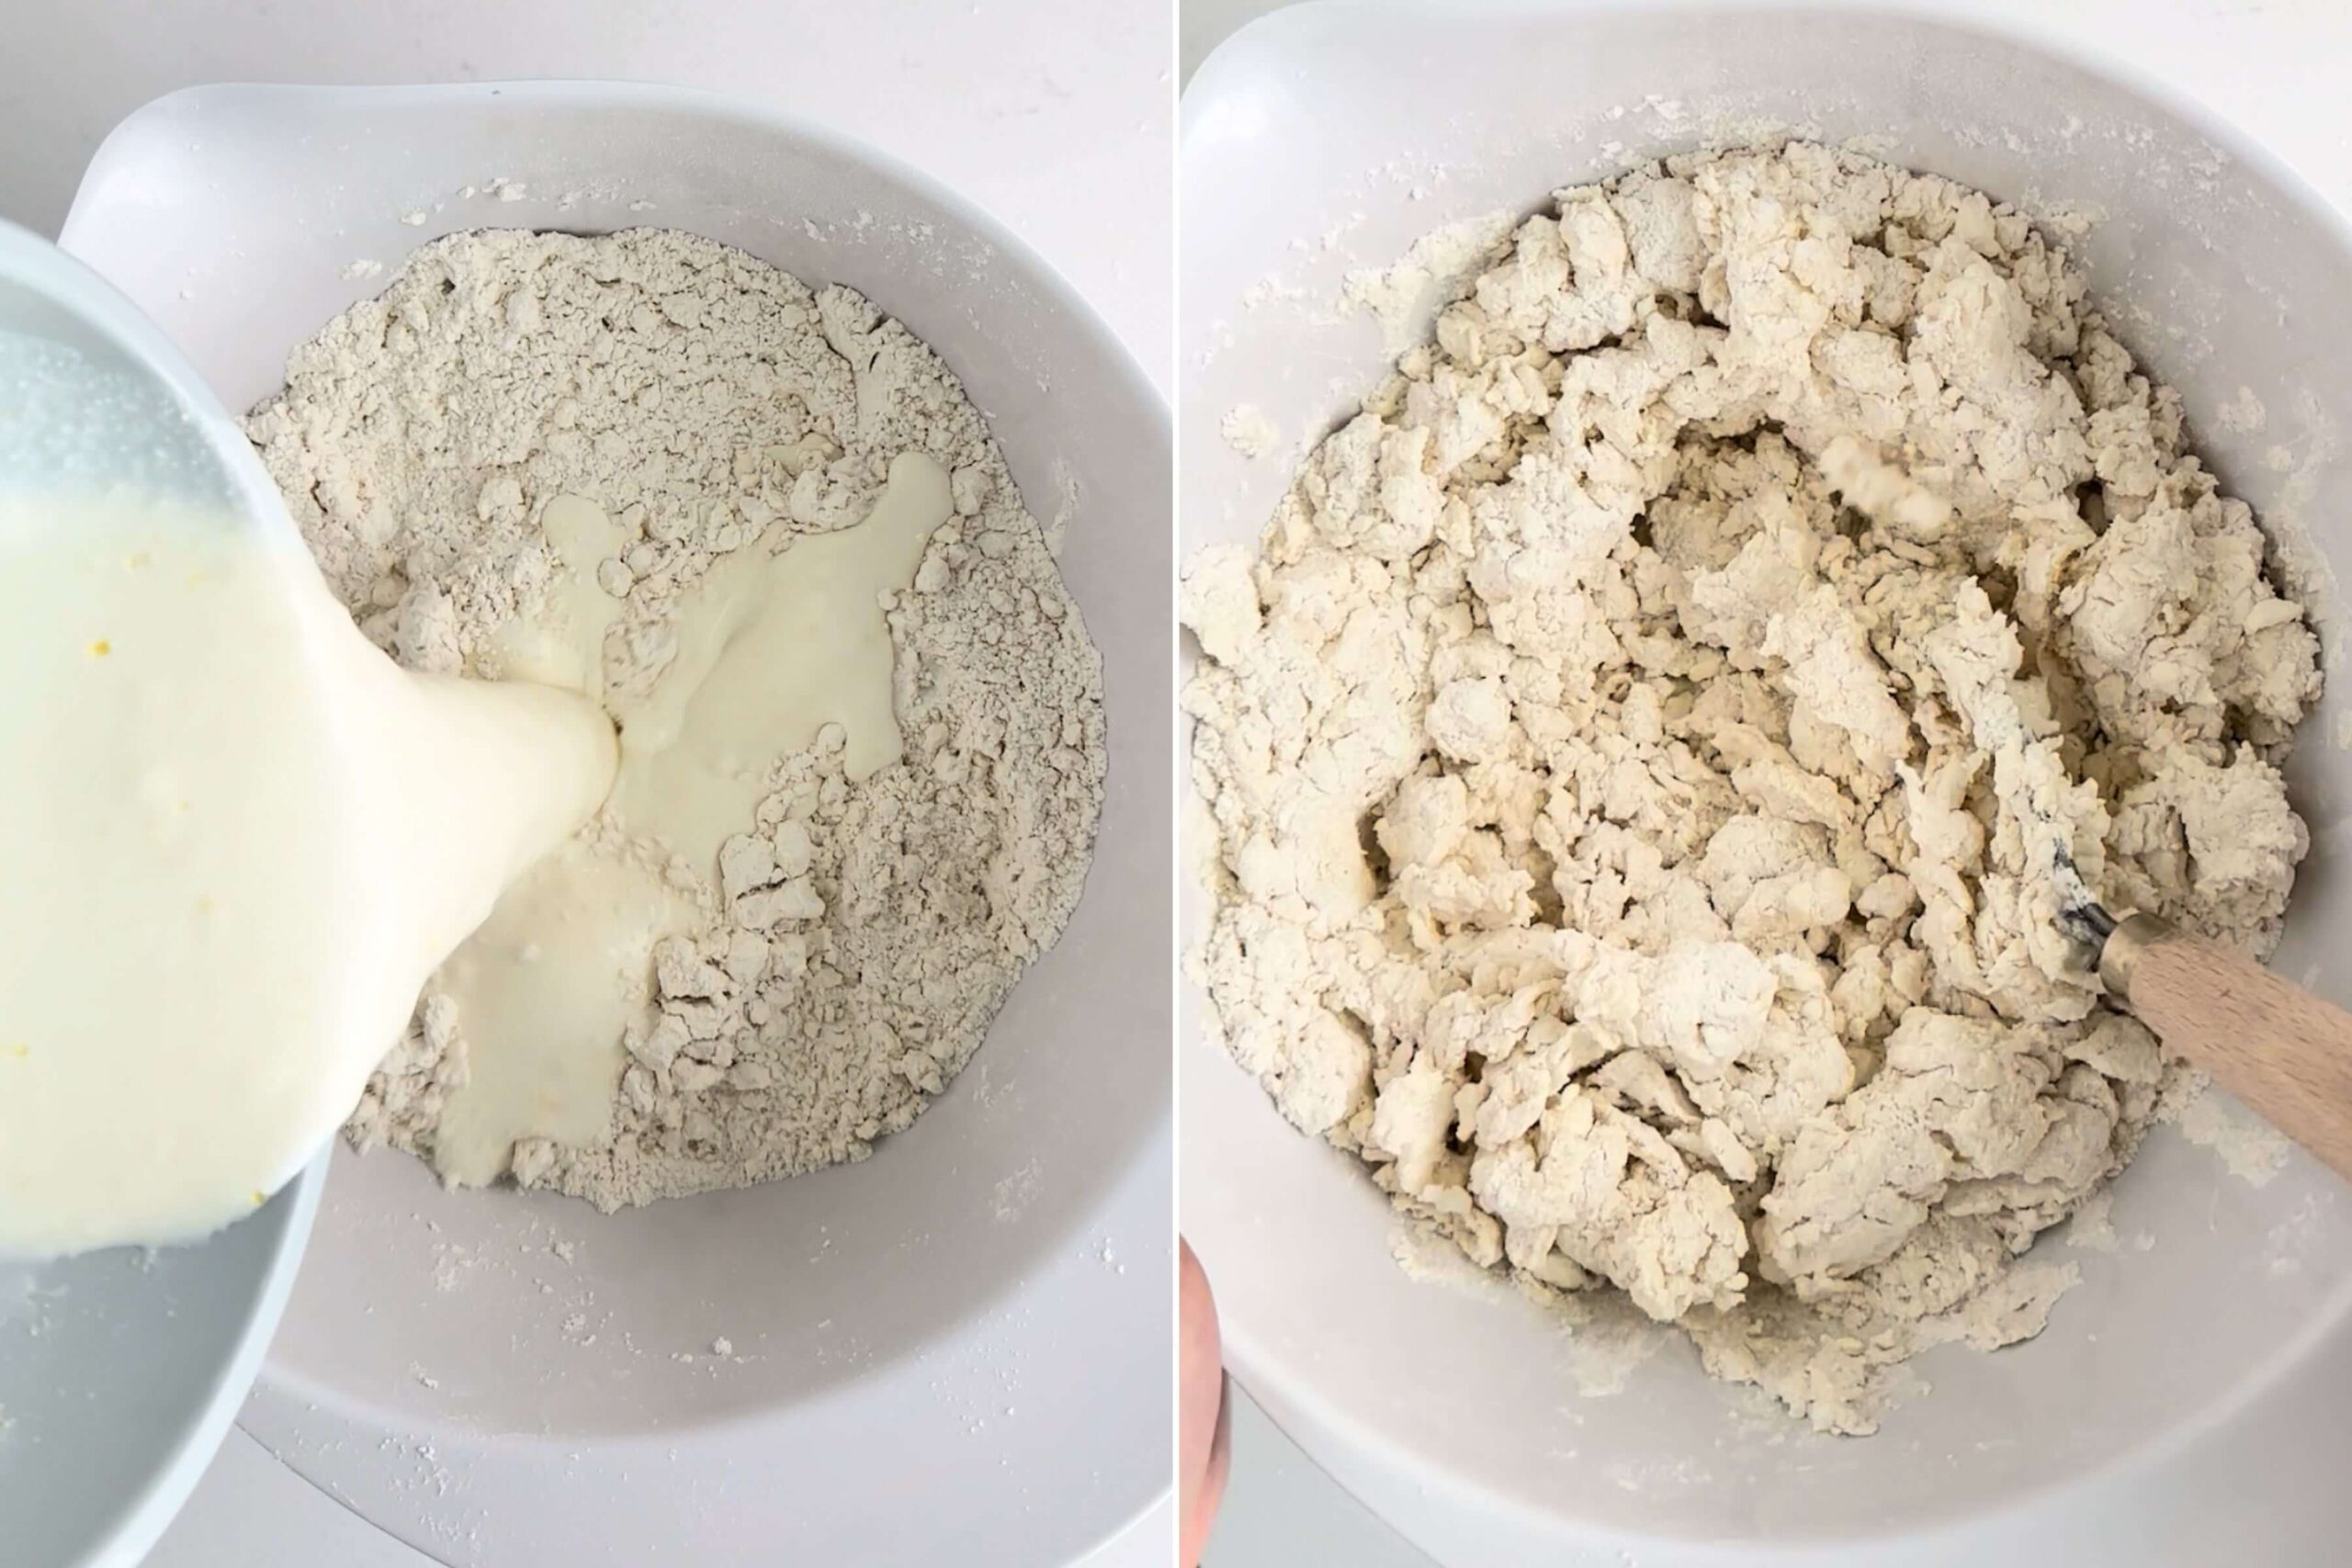 combining the whet and the dry ingredients together until they are incorporated into a lemon biscuit dough